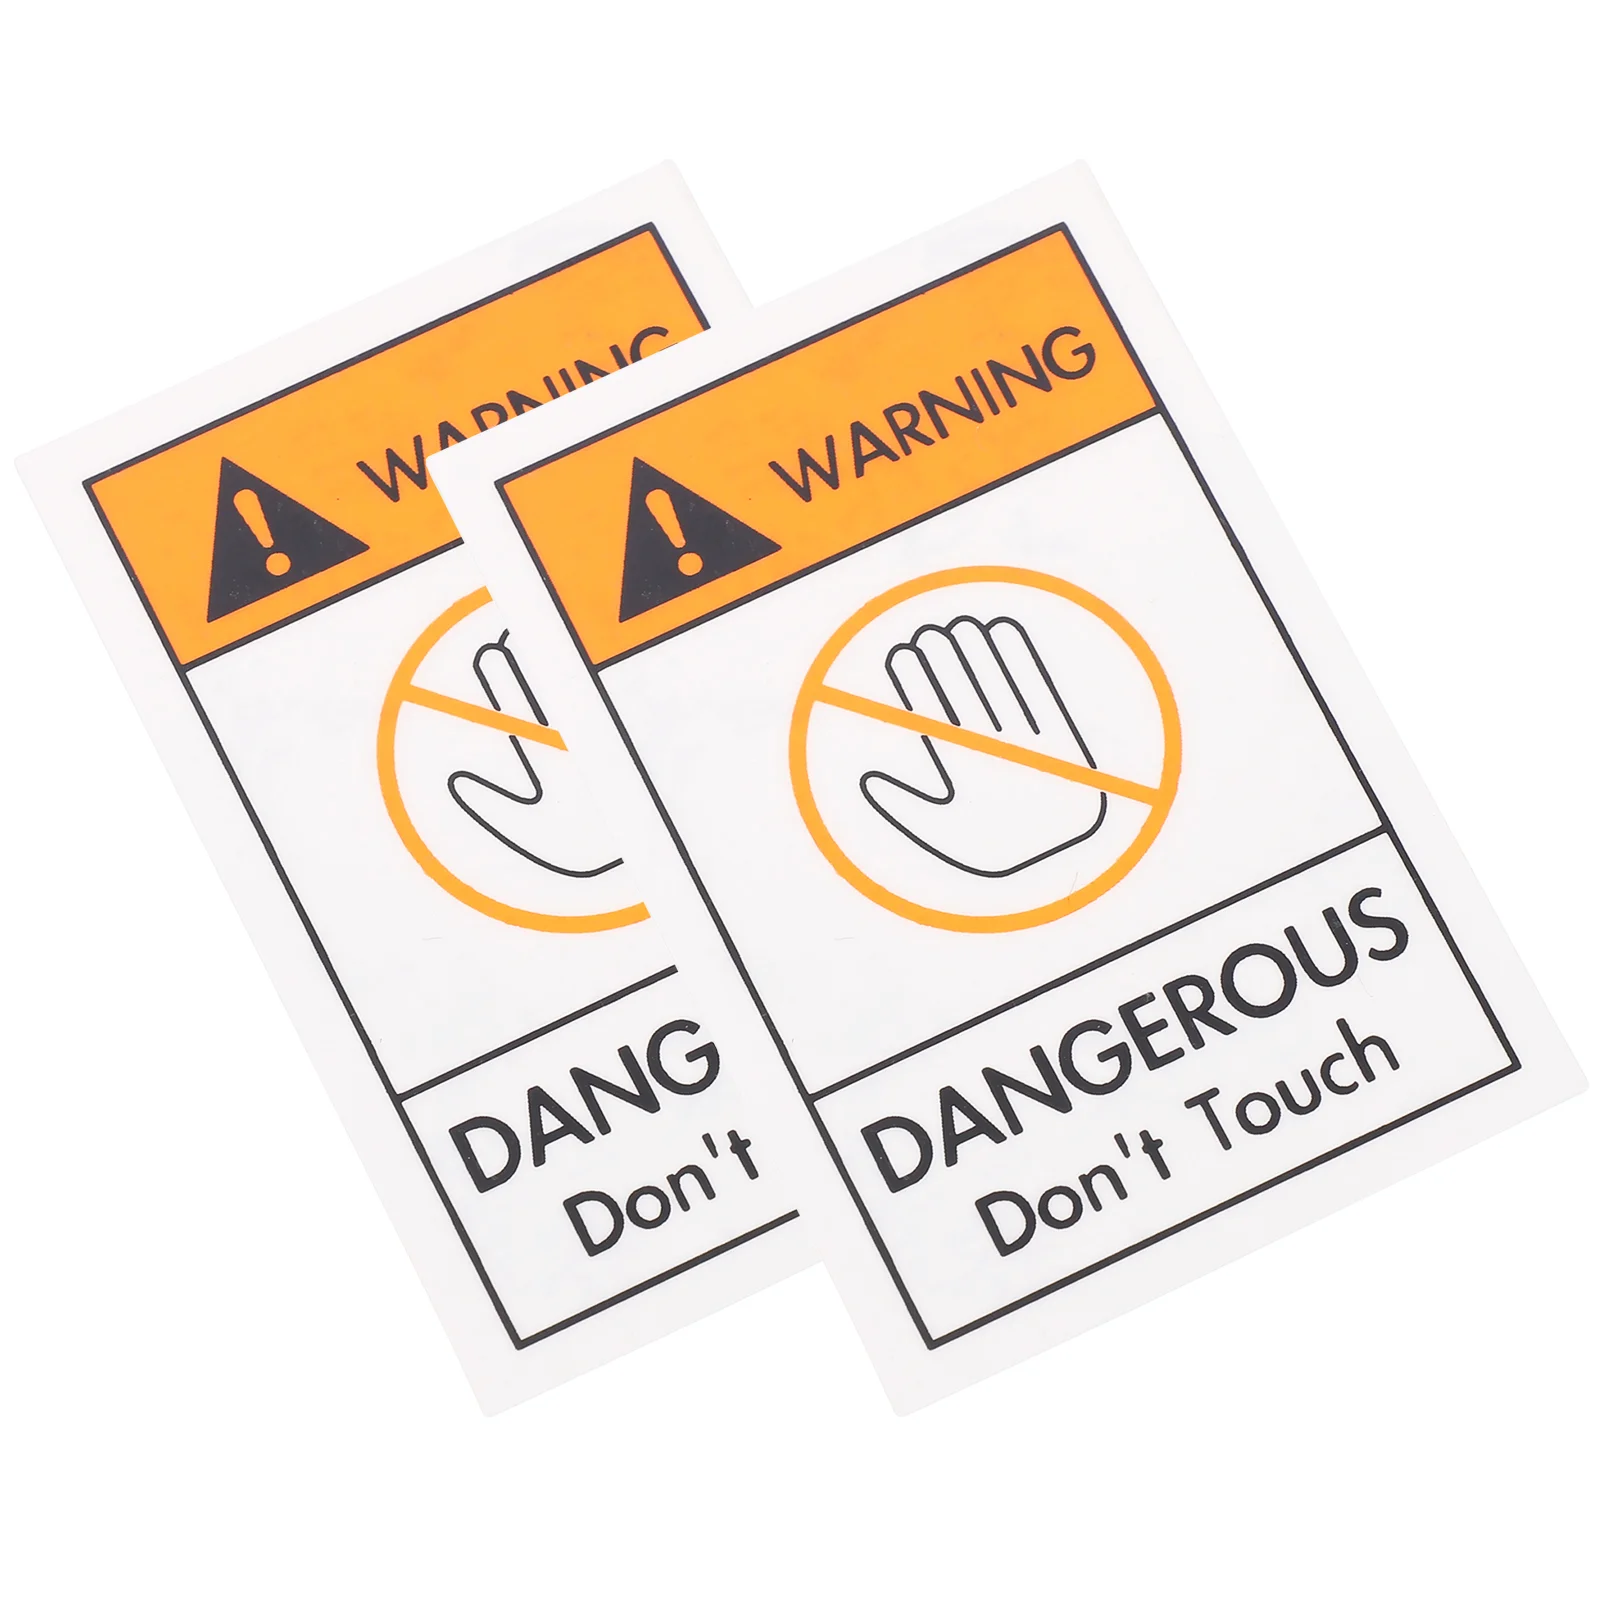 

2 Pcs Don't Touch Sign Security Signs Caution Danger Decal Stickers Adhesive No Safety Warning Pvc Not Label